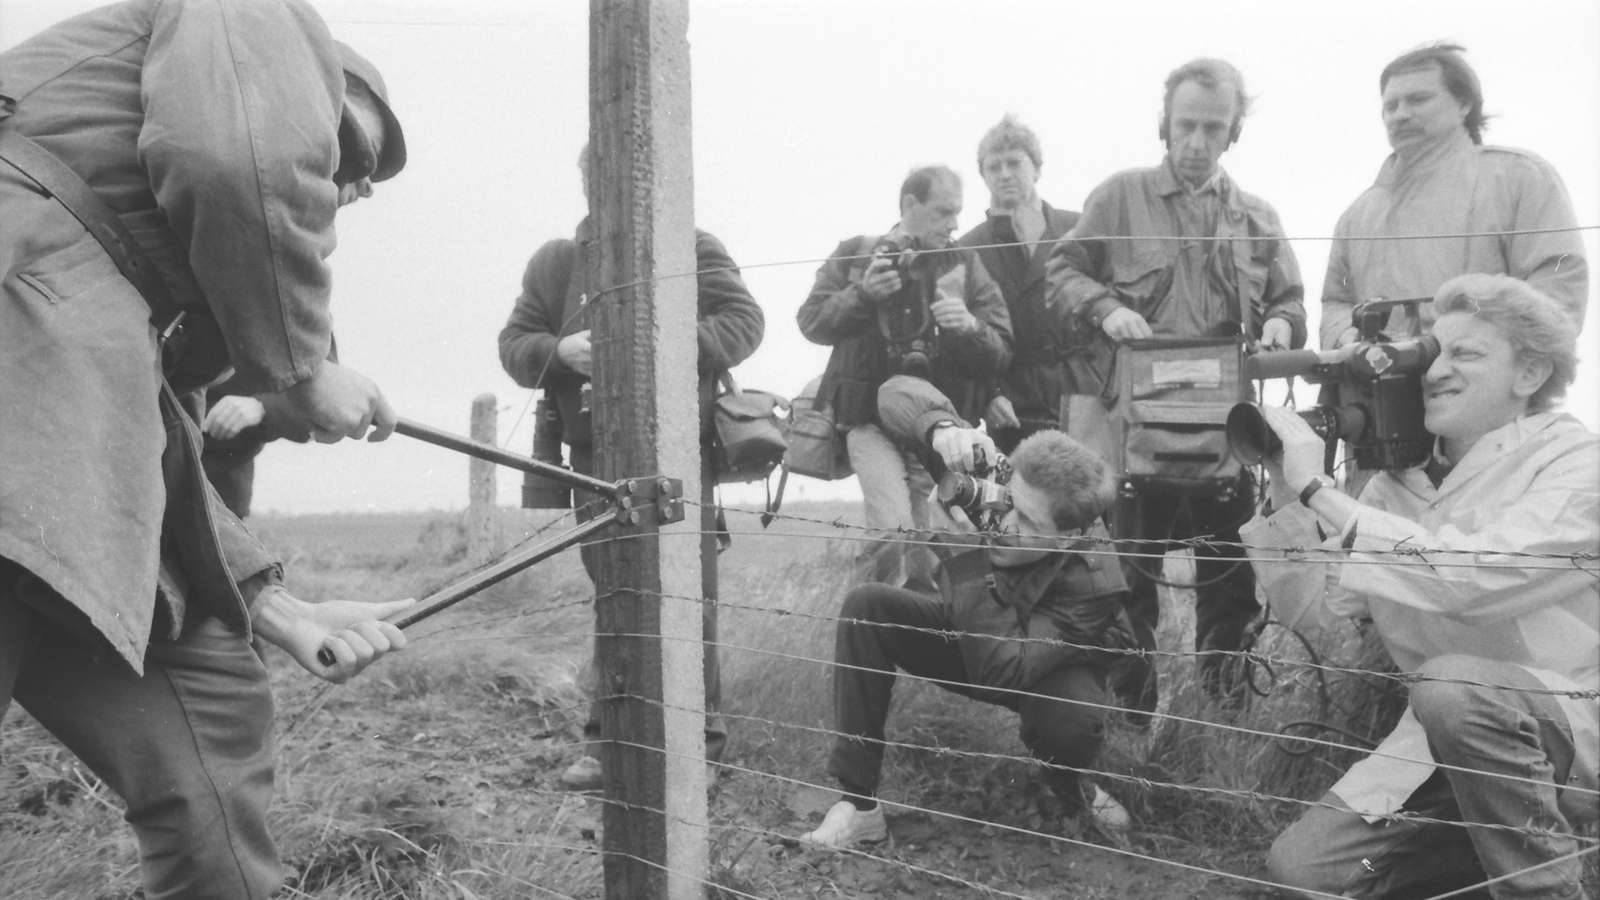 33 years ago today, Hungary tore the first hole in the Iron Curtain - PHOTOS 99